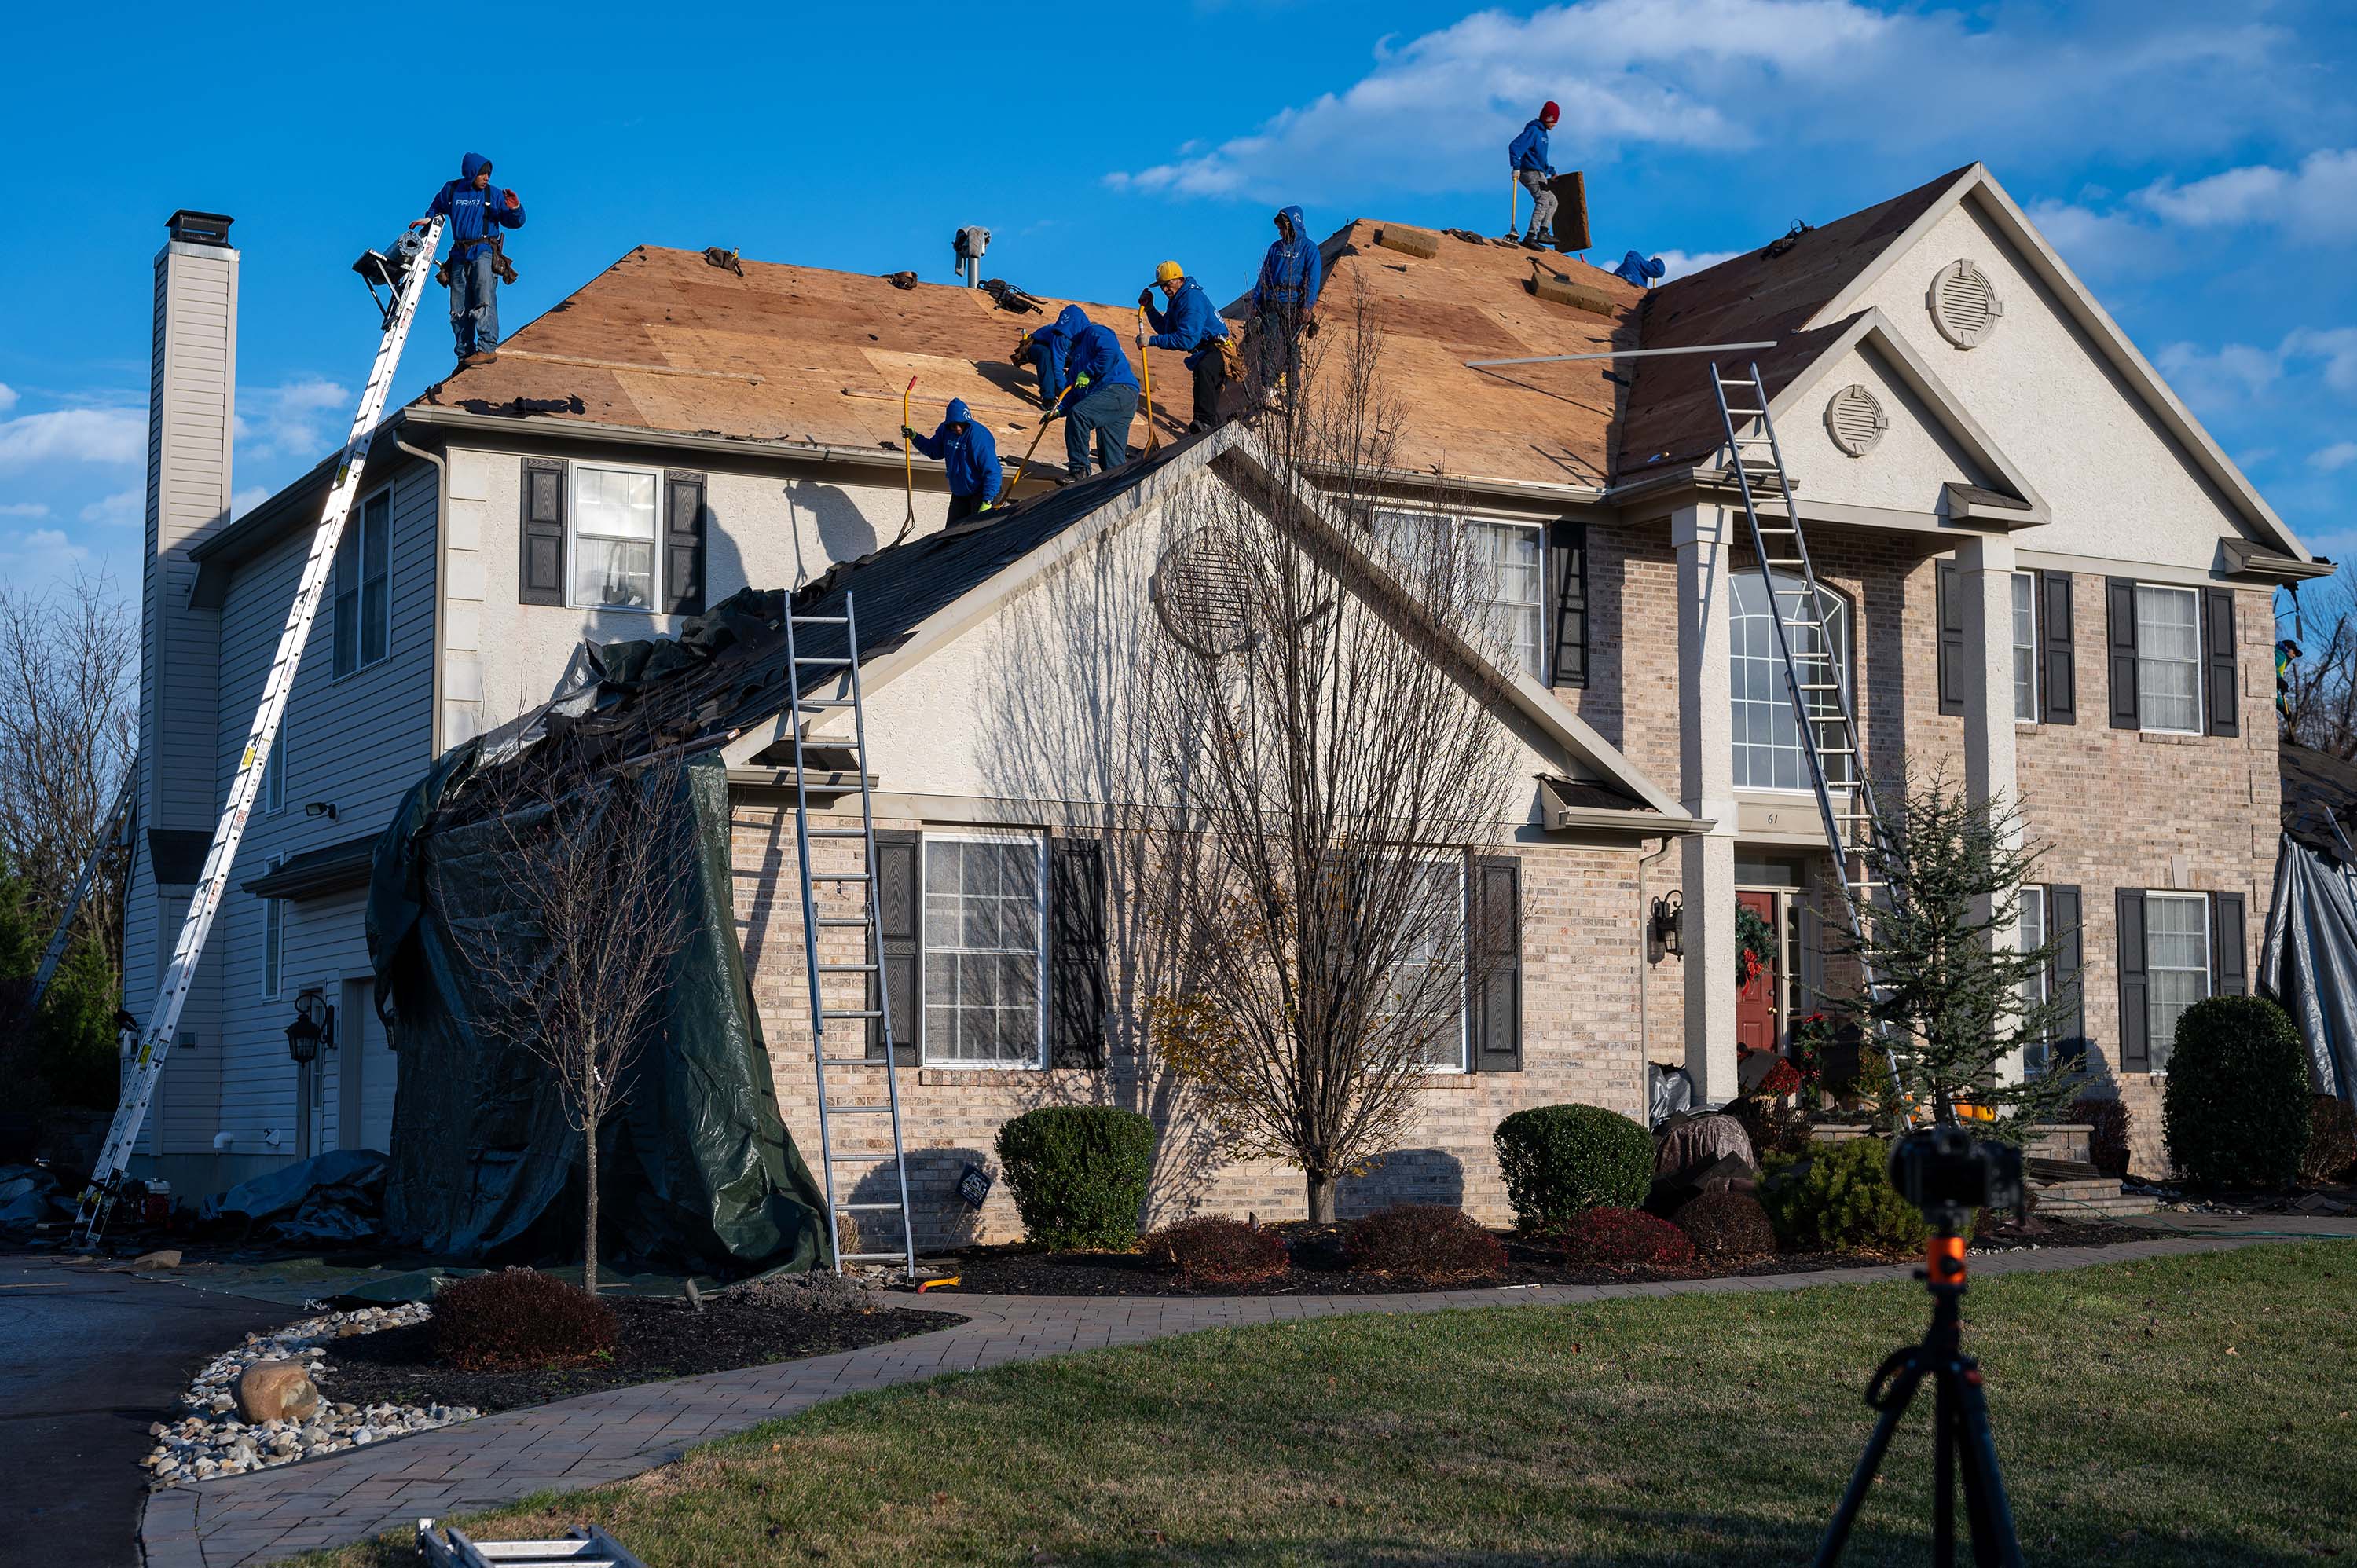 Roofing repair company - residential roofing contractors in Jenkintown, PA (large image)